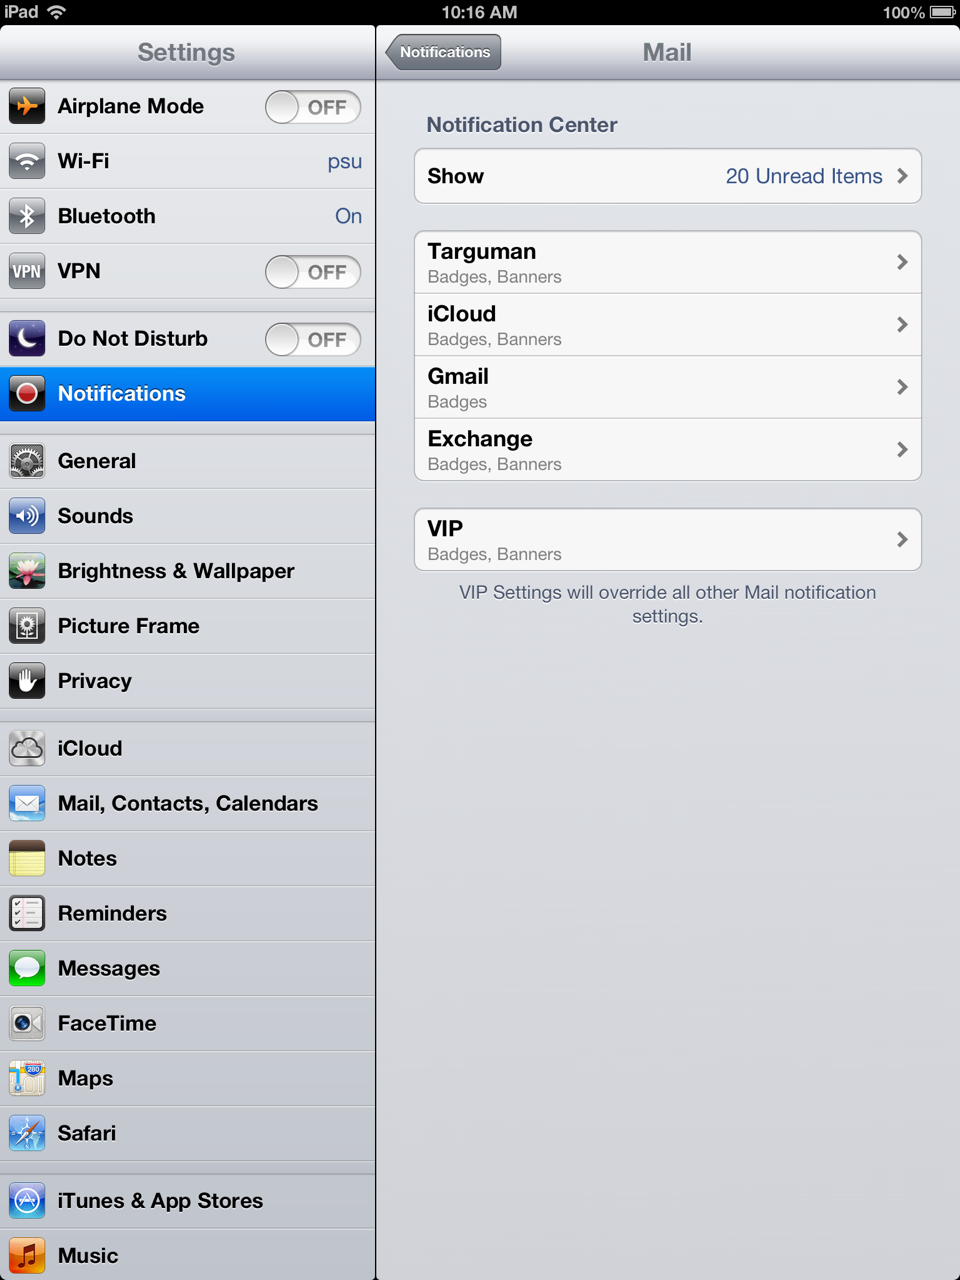 Mail Notification Settings on the iPad